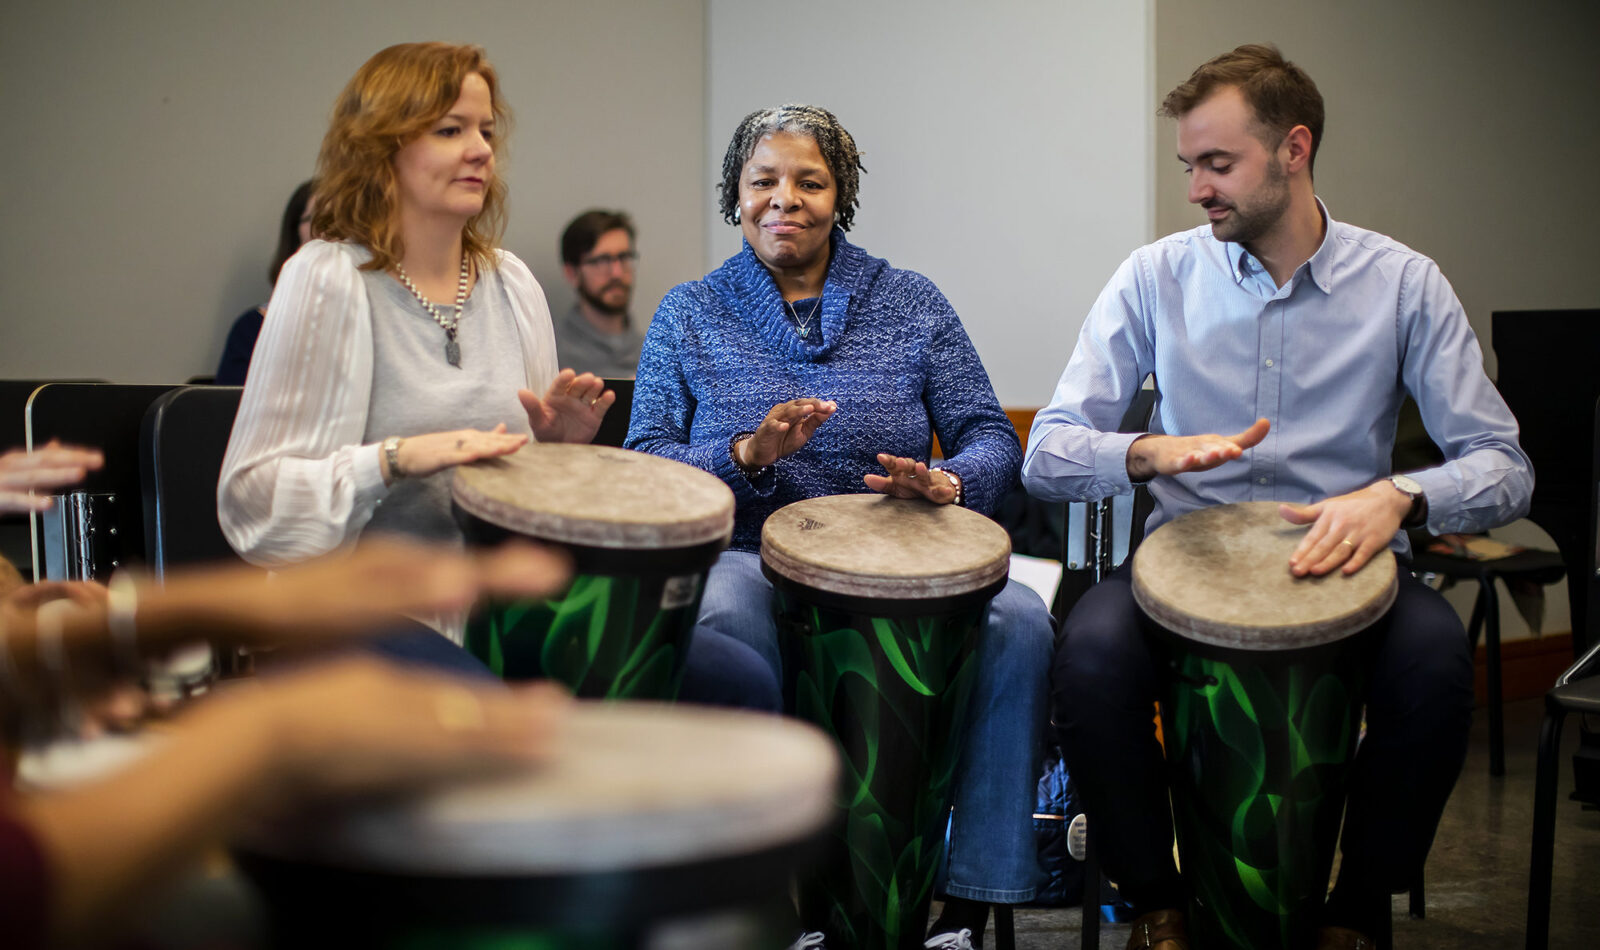 Mary Javian, chair of career studies at the Curtis Institute, Tempy Small, a program participant, and Adam Pangburn, coordinator of community performance at Curtis, participated in a drum circle at a “Creative Expression through Music” session. Nick DiBerardino (not pictured) lead the classes, which were coordinated by Penn graduate students Sarah Bujno and Matt Volpe (in the background).